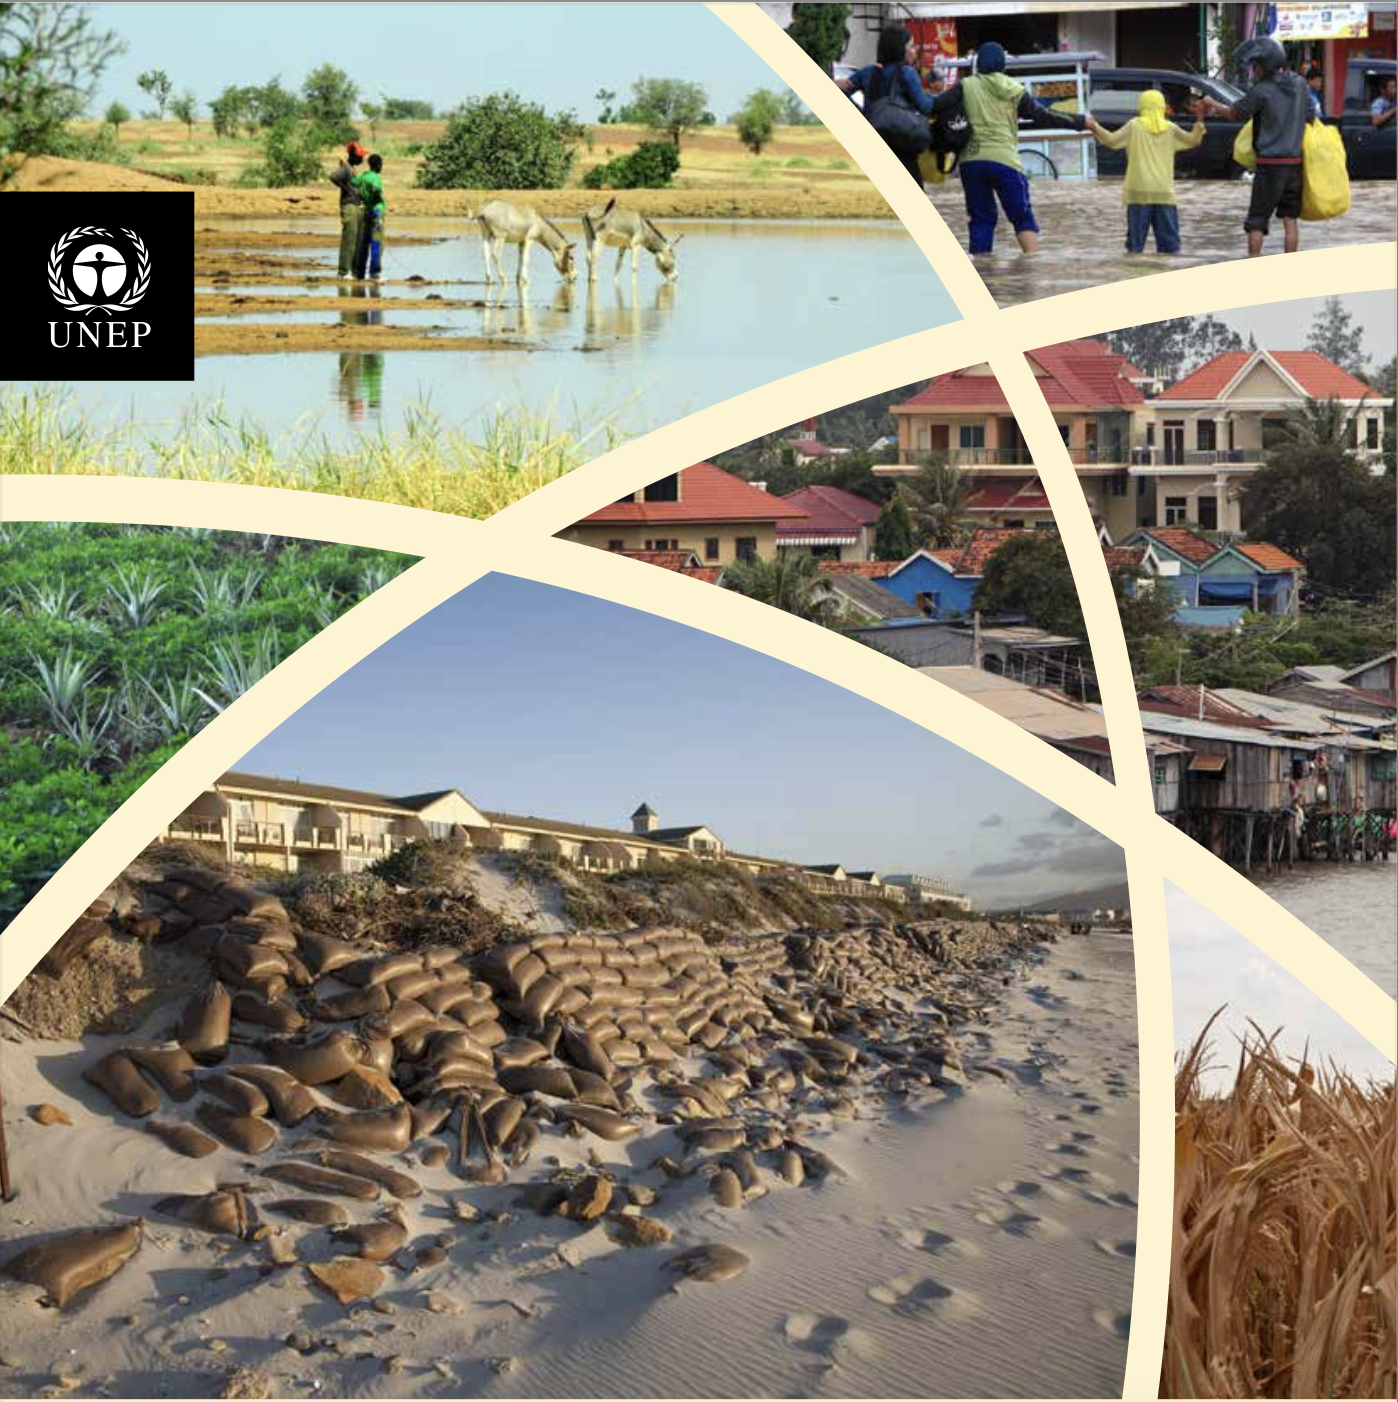 The cover of the PROVIA guidance document, composed of 6 images: image of people walking through a flooded urban area, image of people standing in a flooded field with cattle, 2 images of grass fields, 1 image of a settlement near a river, image of sand dunes